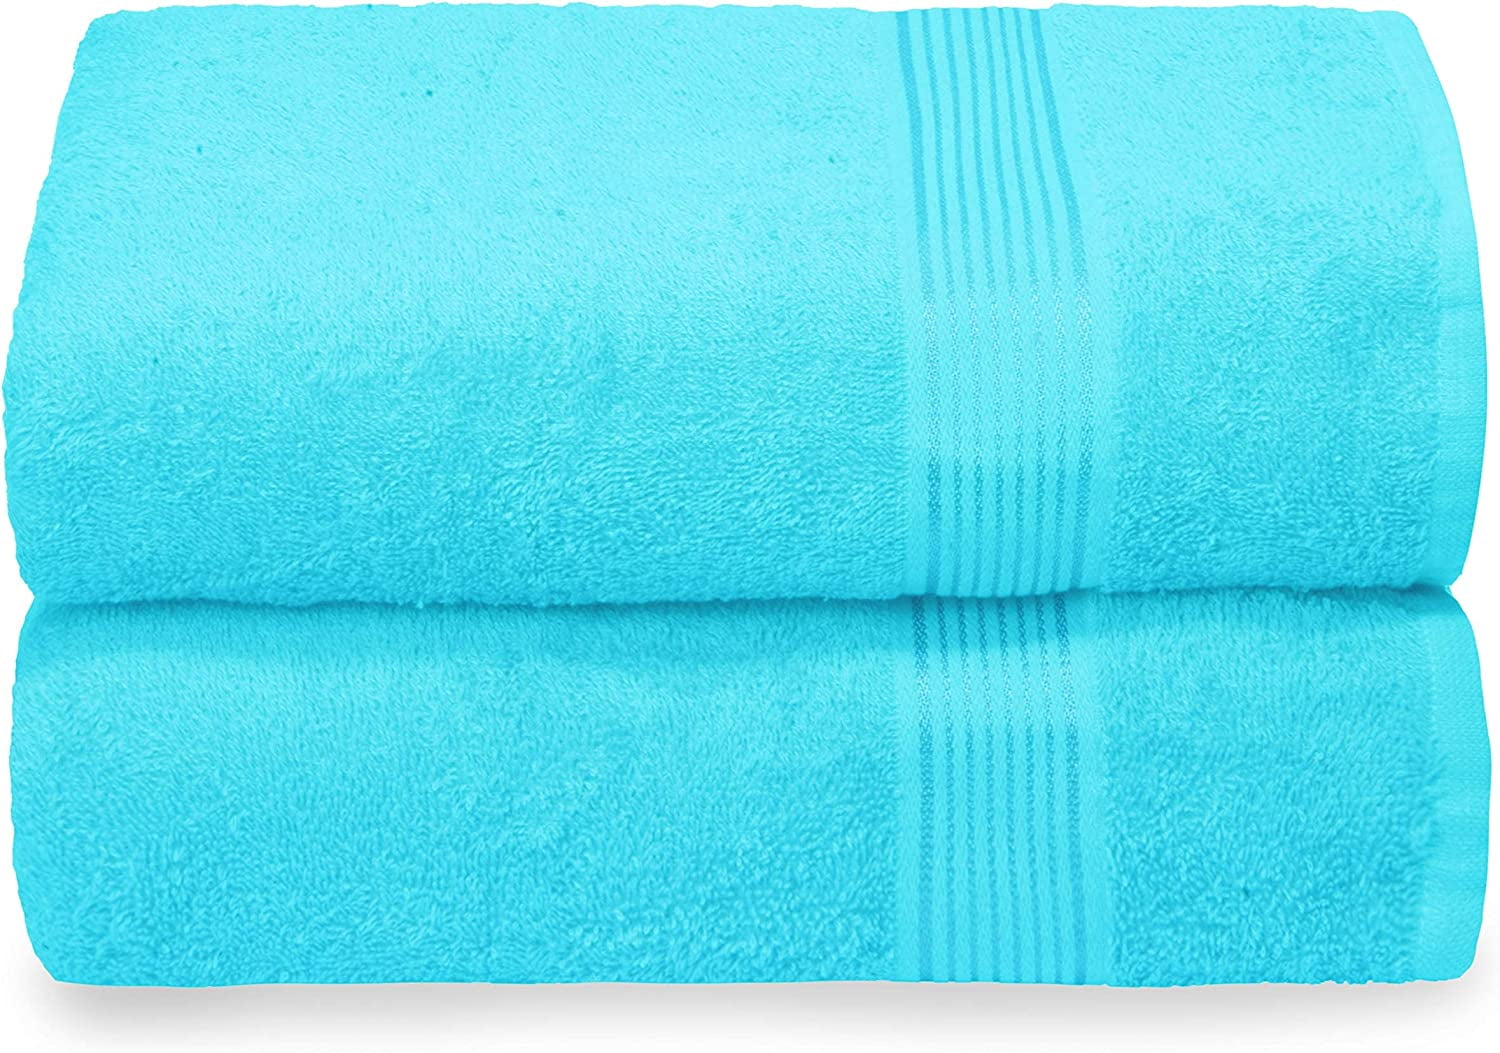 Clorox Bleach Friendly, Quick Dry, 100% Cotton Bath Towels (30 L x 52 W),  Highly Absorbent, Light Weight, Easy to Wash (2 Pack, Mineral Blue)…